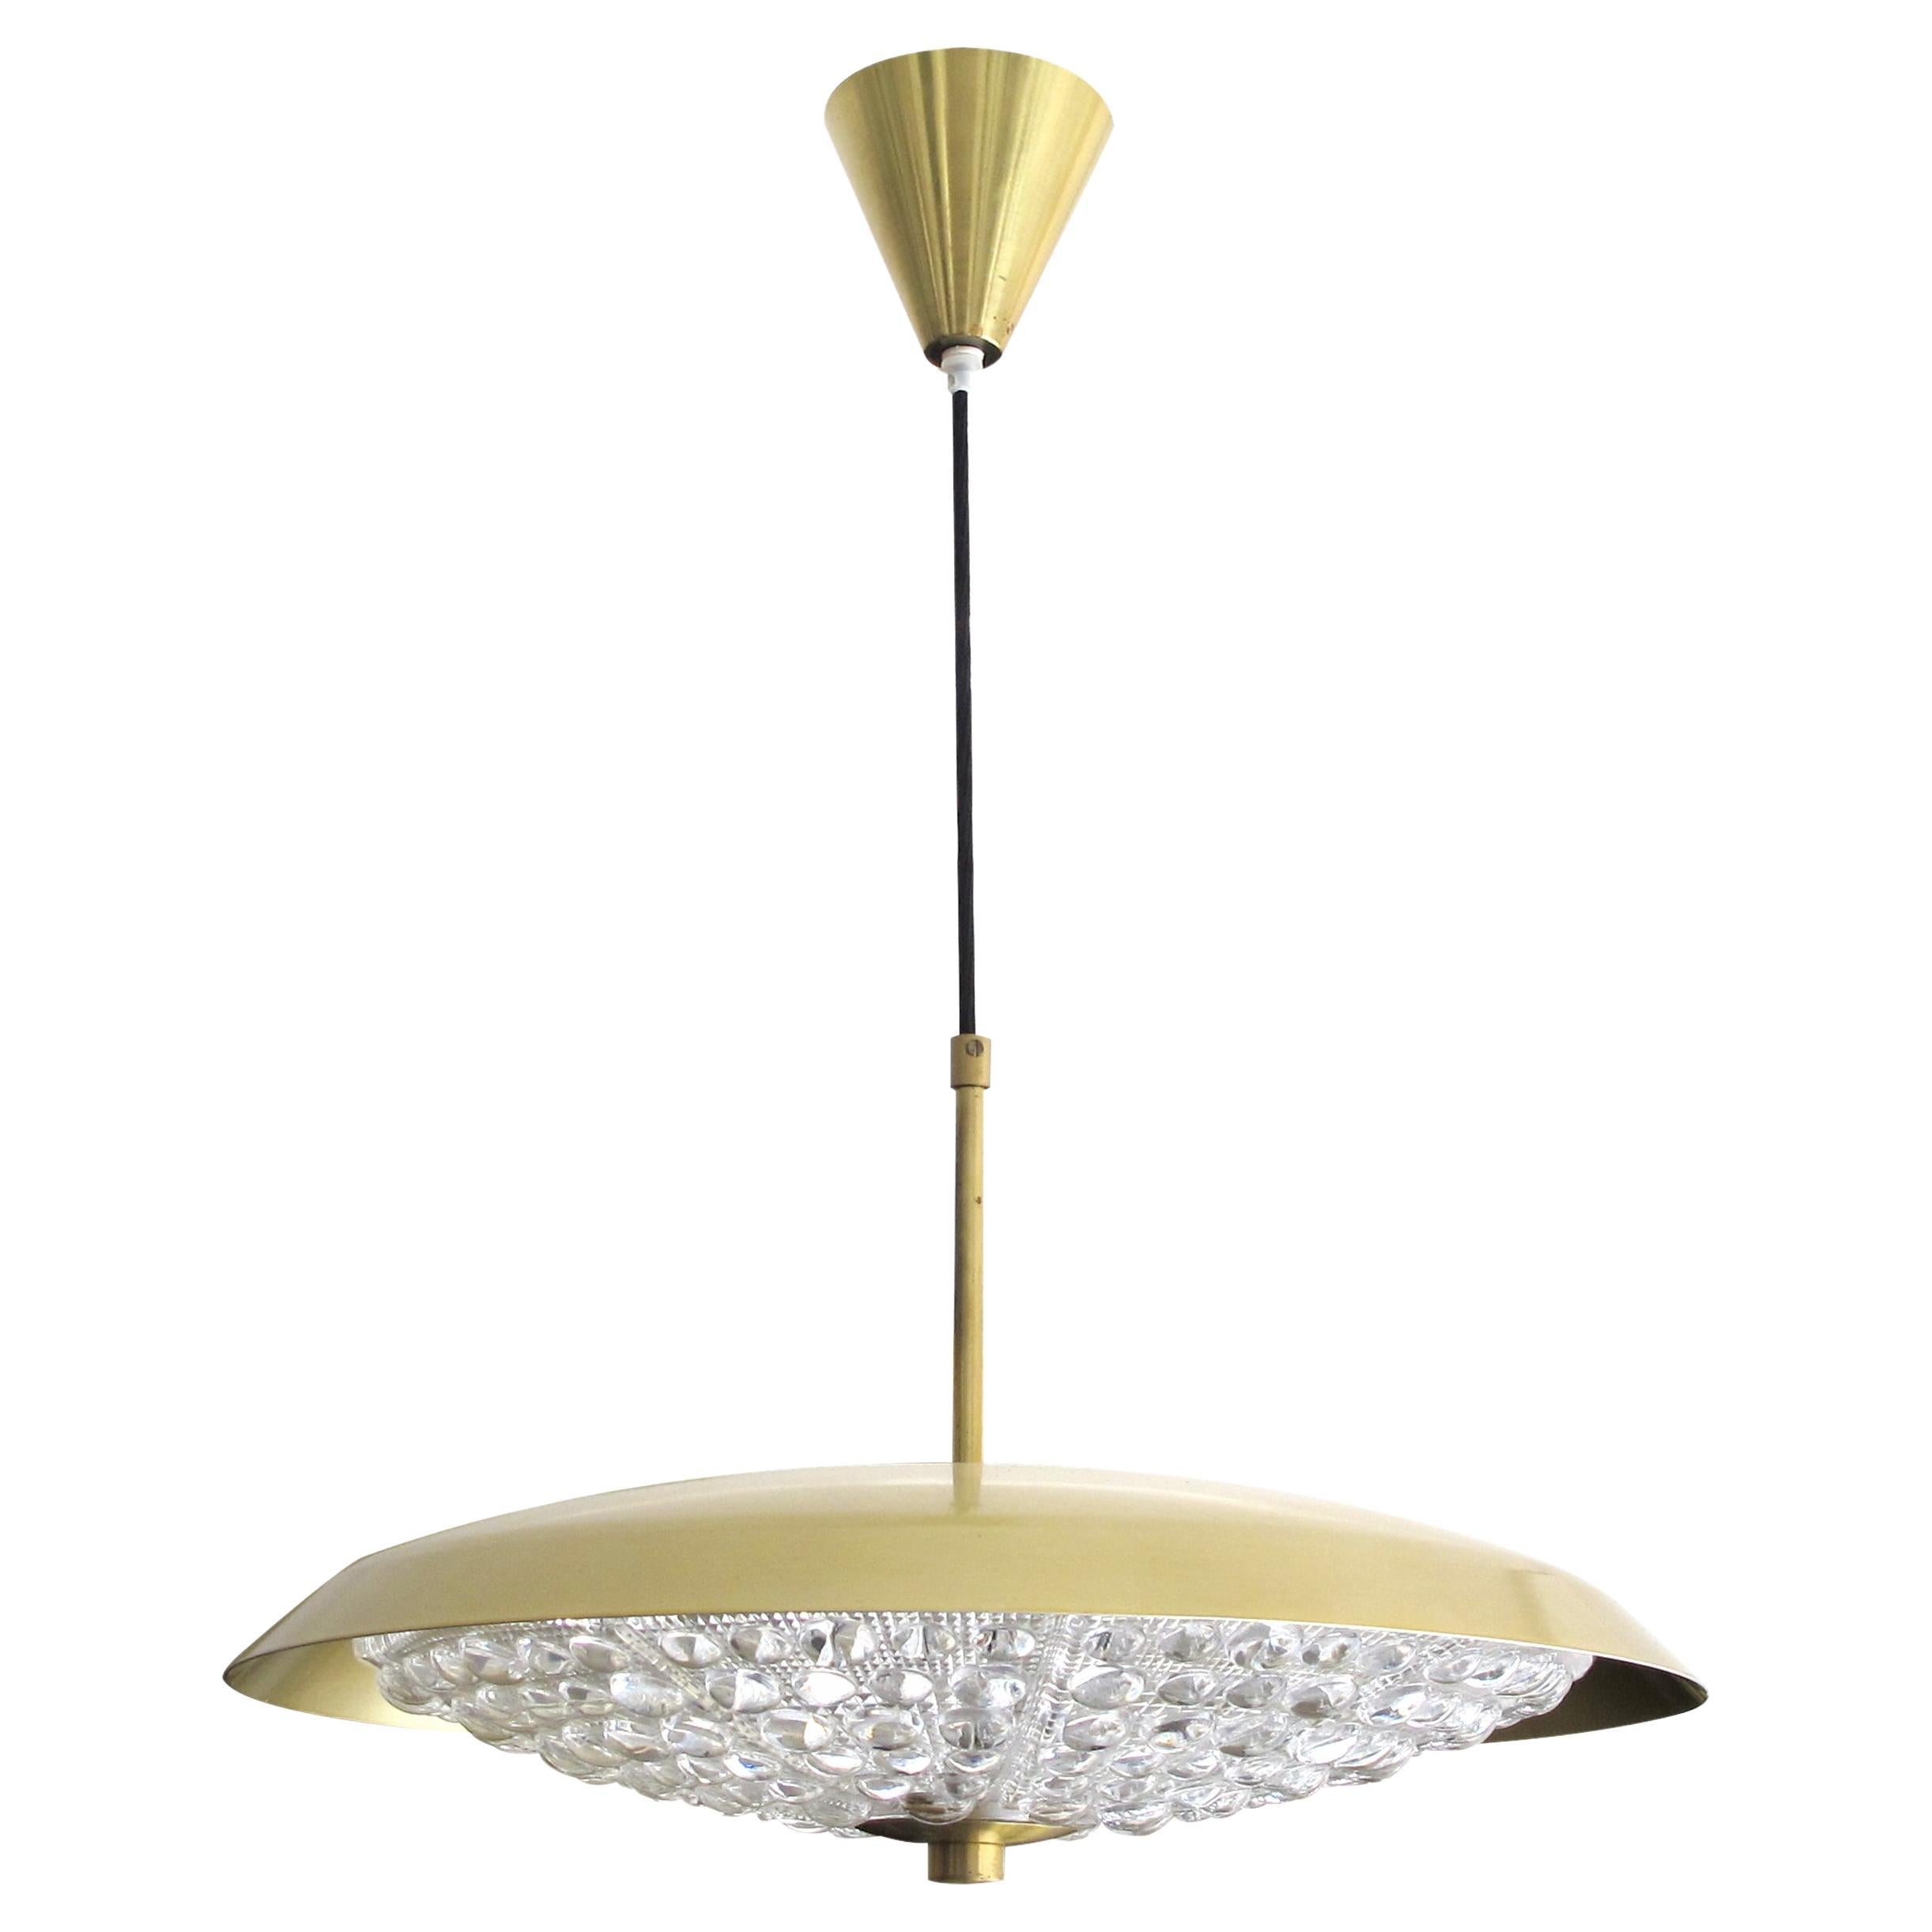 1960s Swedish Brass & Glass Ceiling Light by Carl Fagerlund for Orrefors 